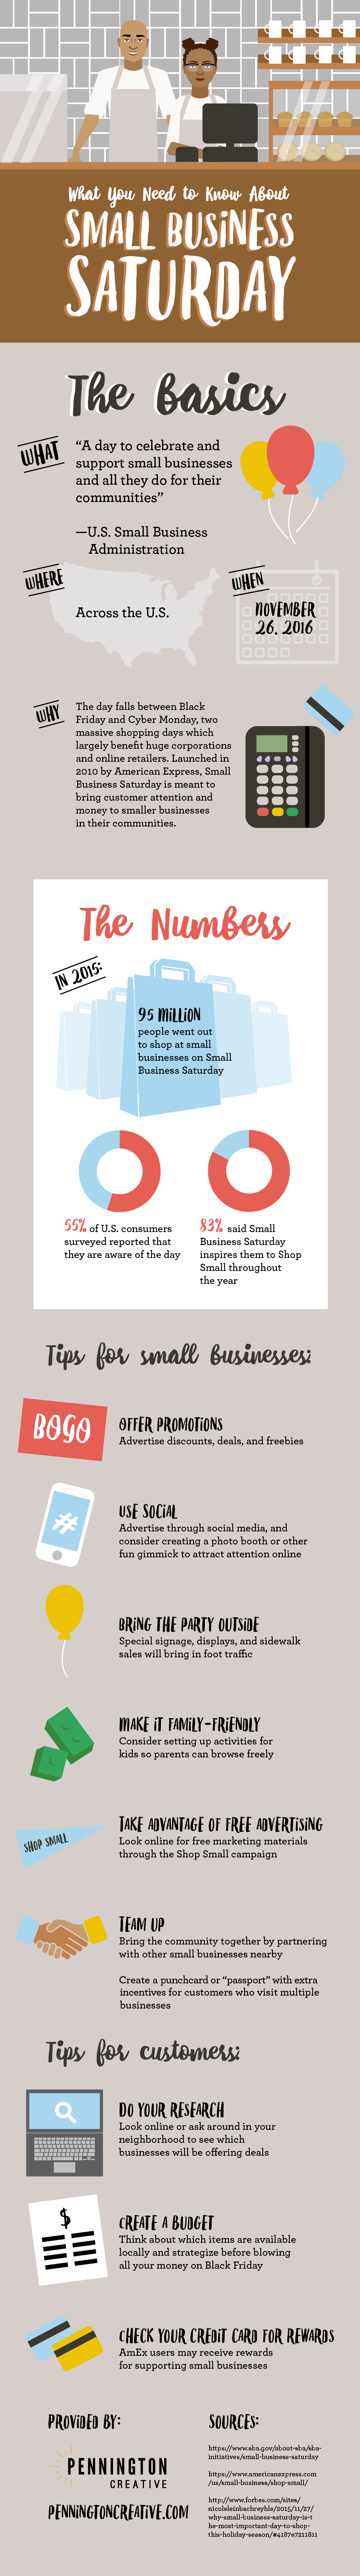 What You Need to Know about Small Business Saturday 2016 Infographic